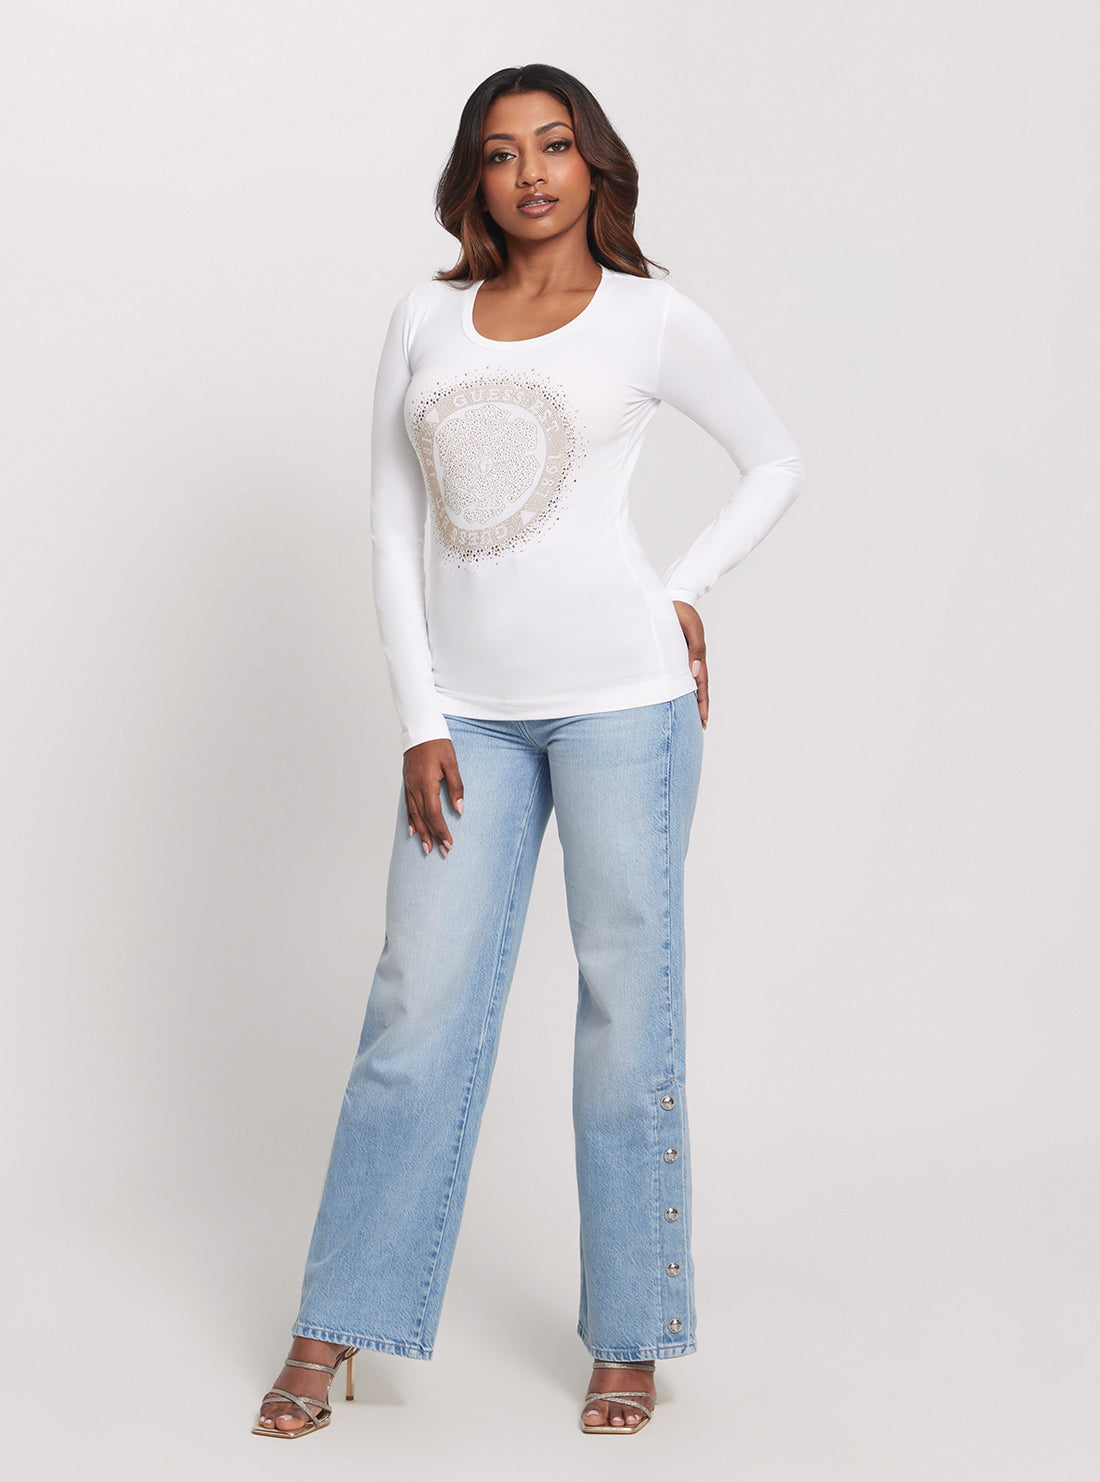 GUESS White Long Sleeve Camelia T-Shirt full view